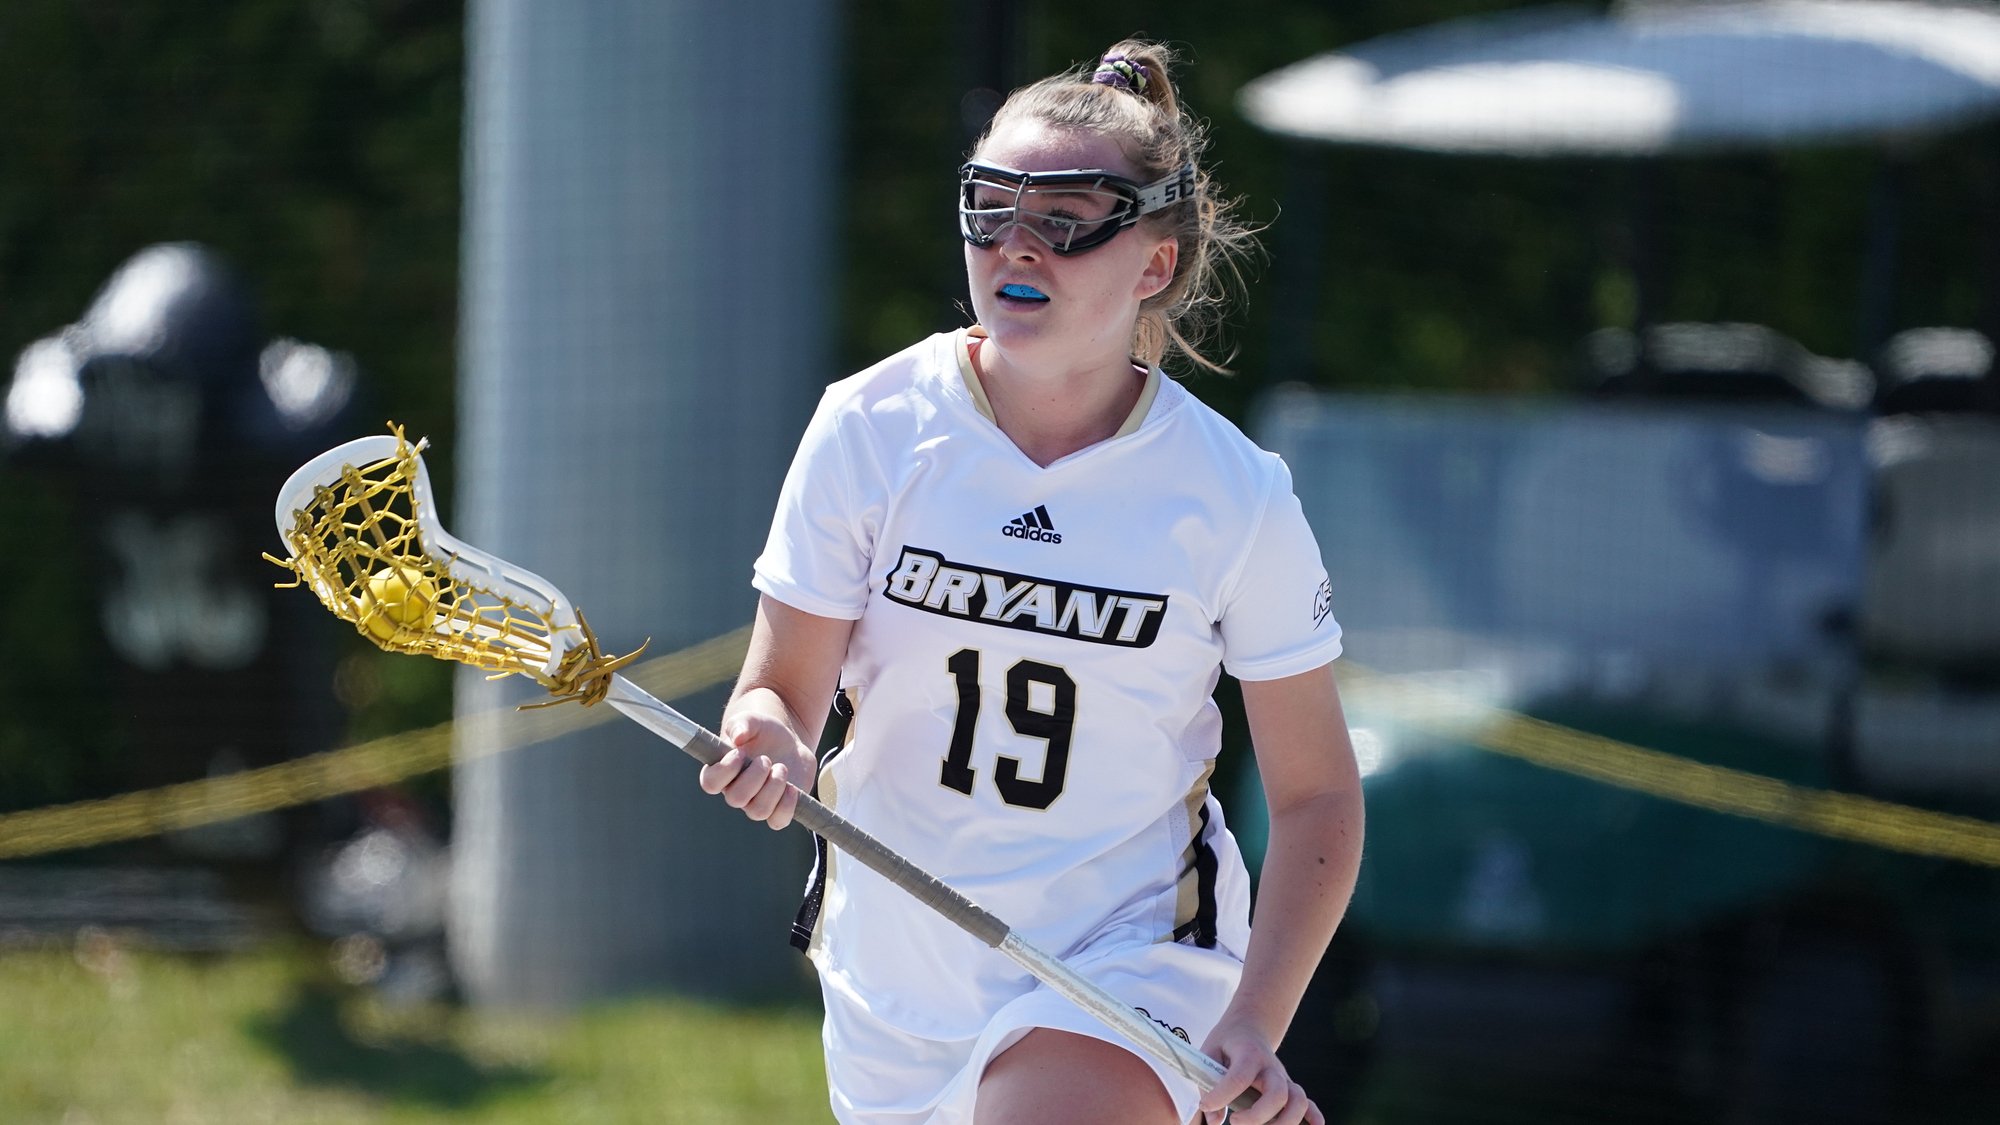 Bryant Travels to UNH on Wednesday